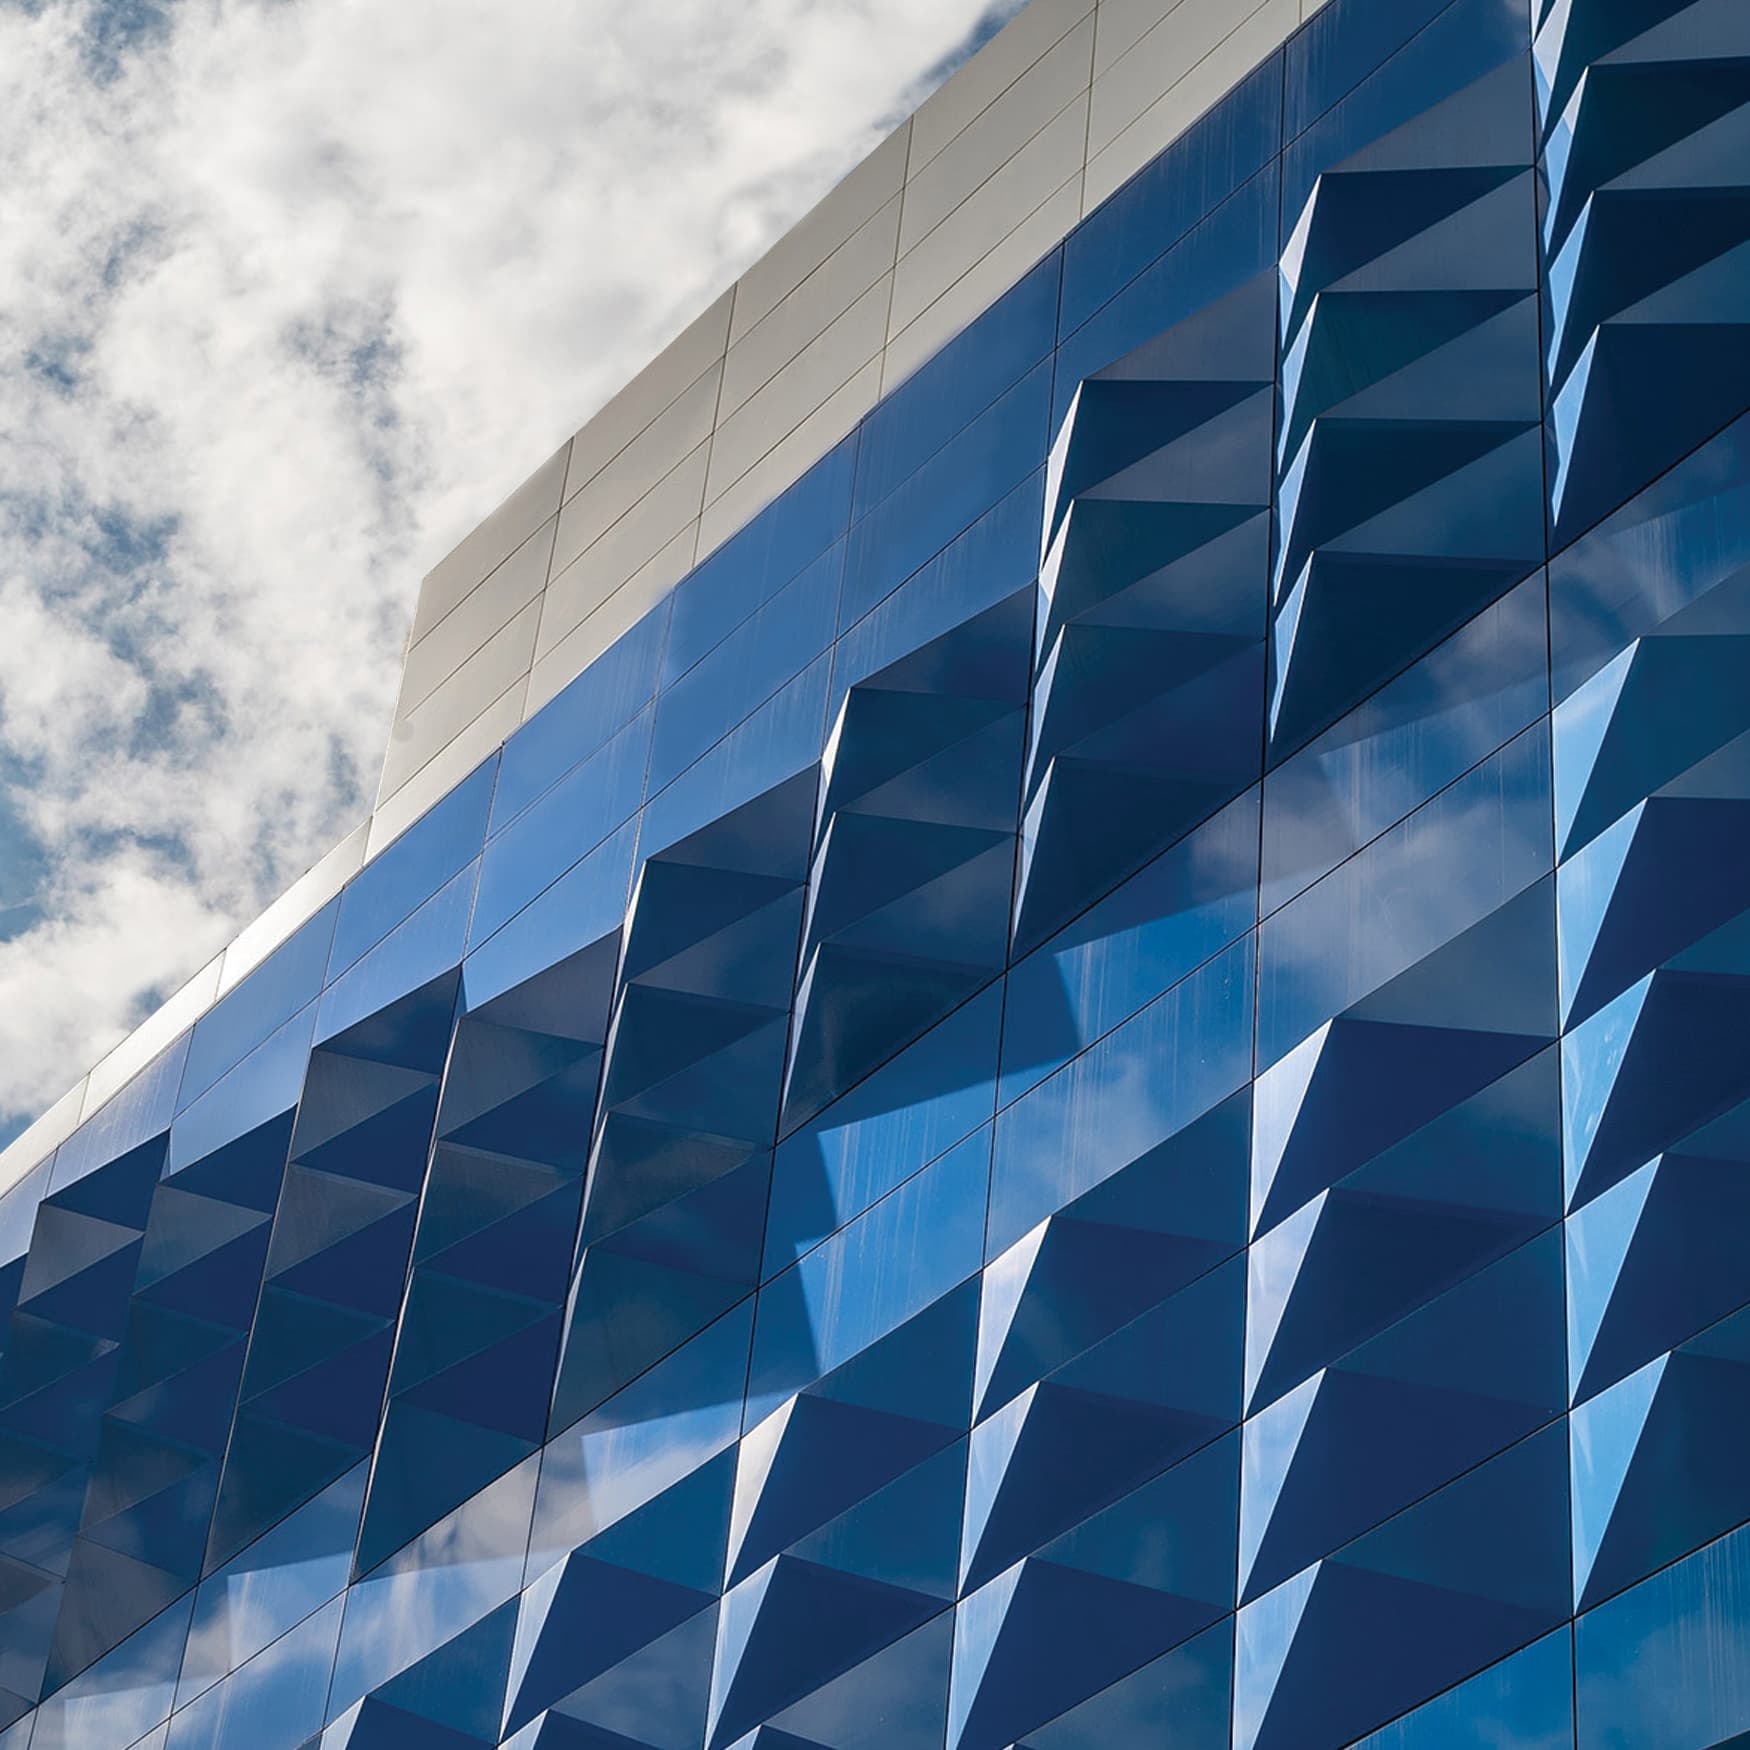 Geometric building facade design in reflective blue with clouds in the sky